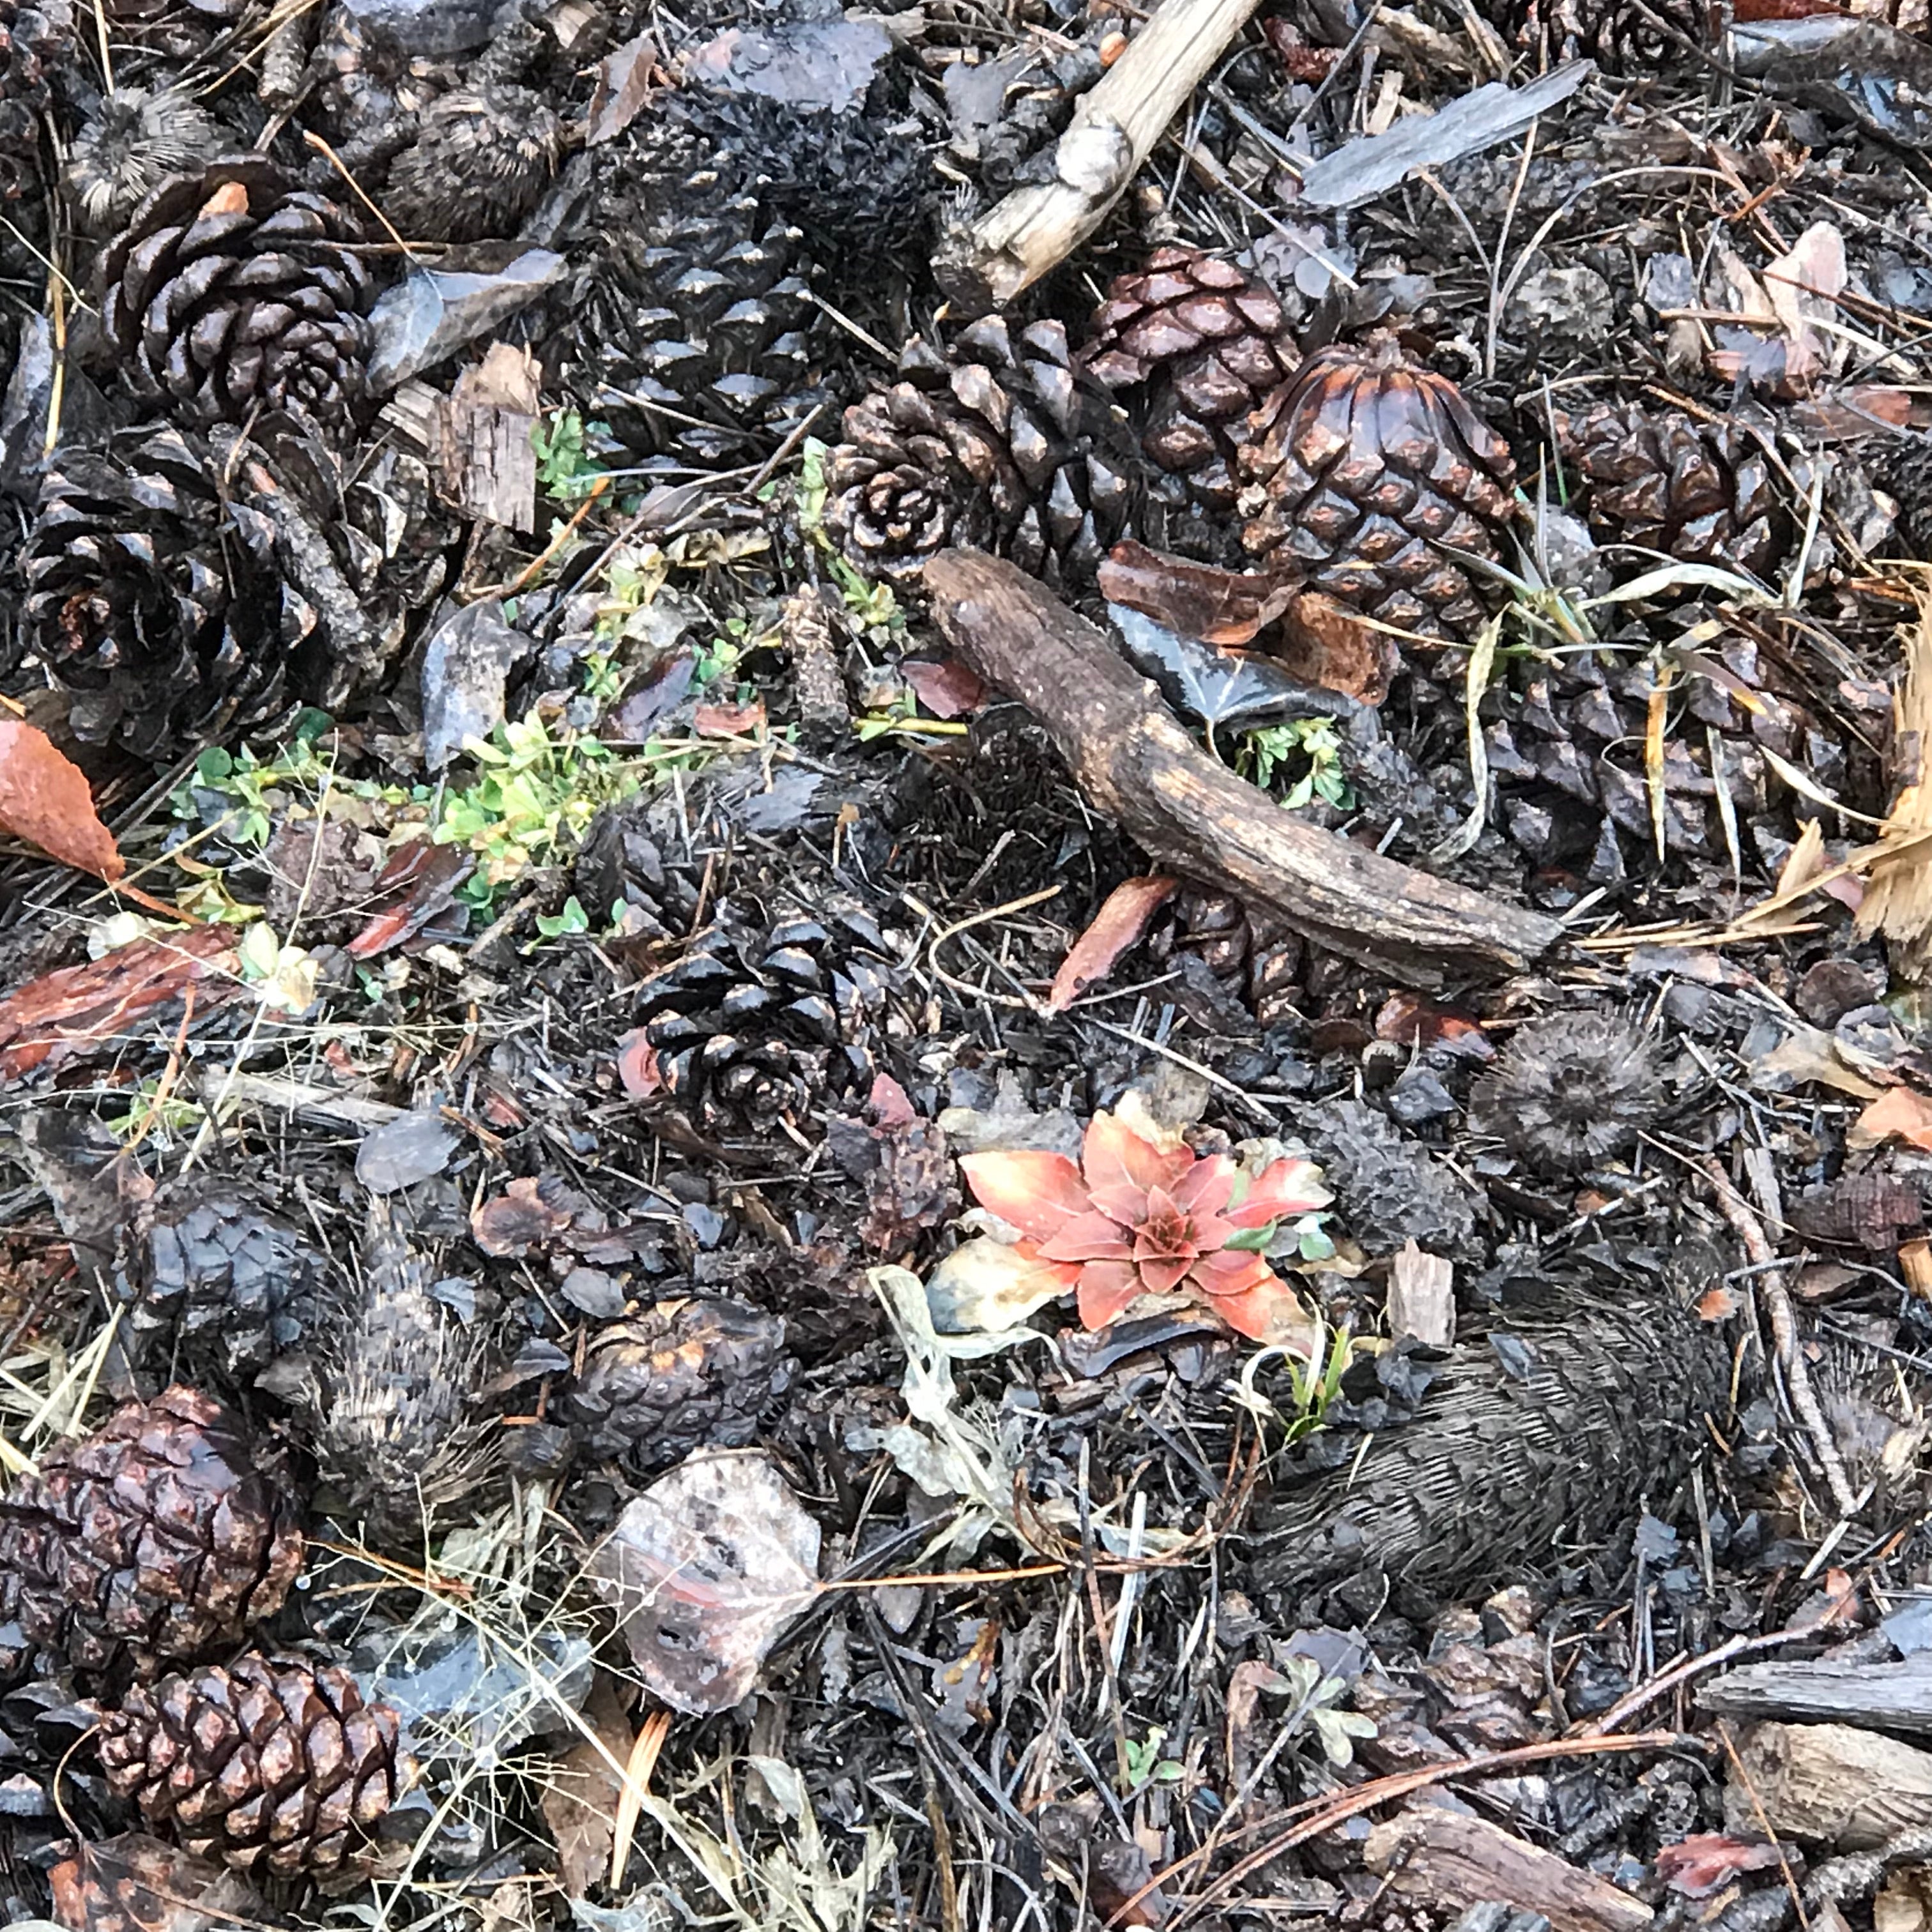 Pinecones and needs form an interesting floor in this area for you to enjoy on your hikes.   This also keeps many of the lower areas from getting muddy on trails.